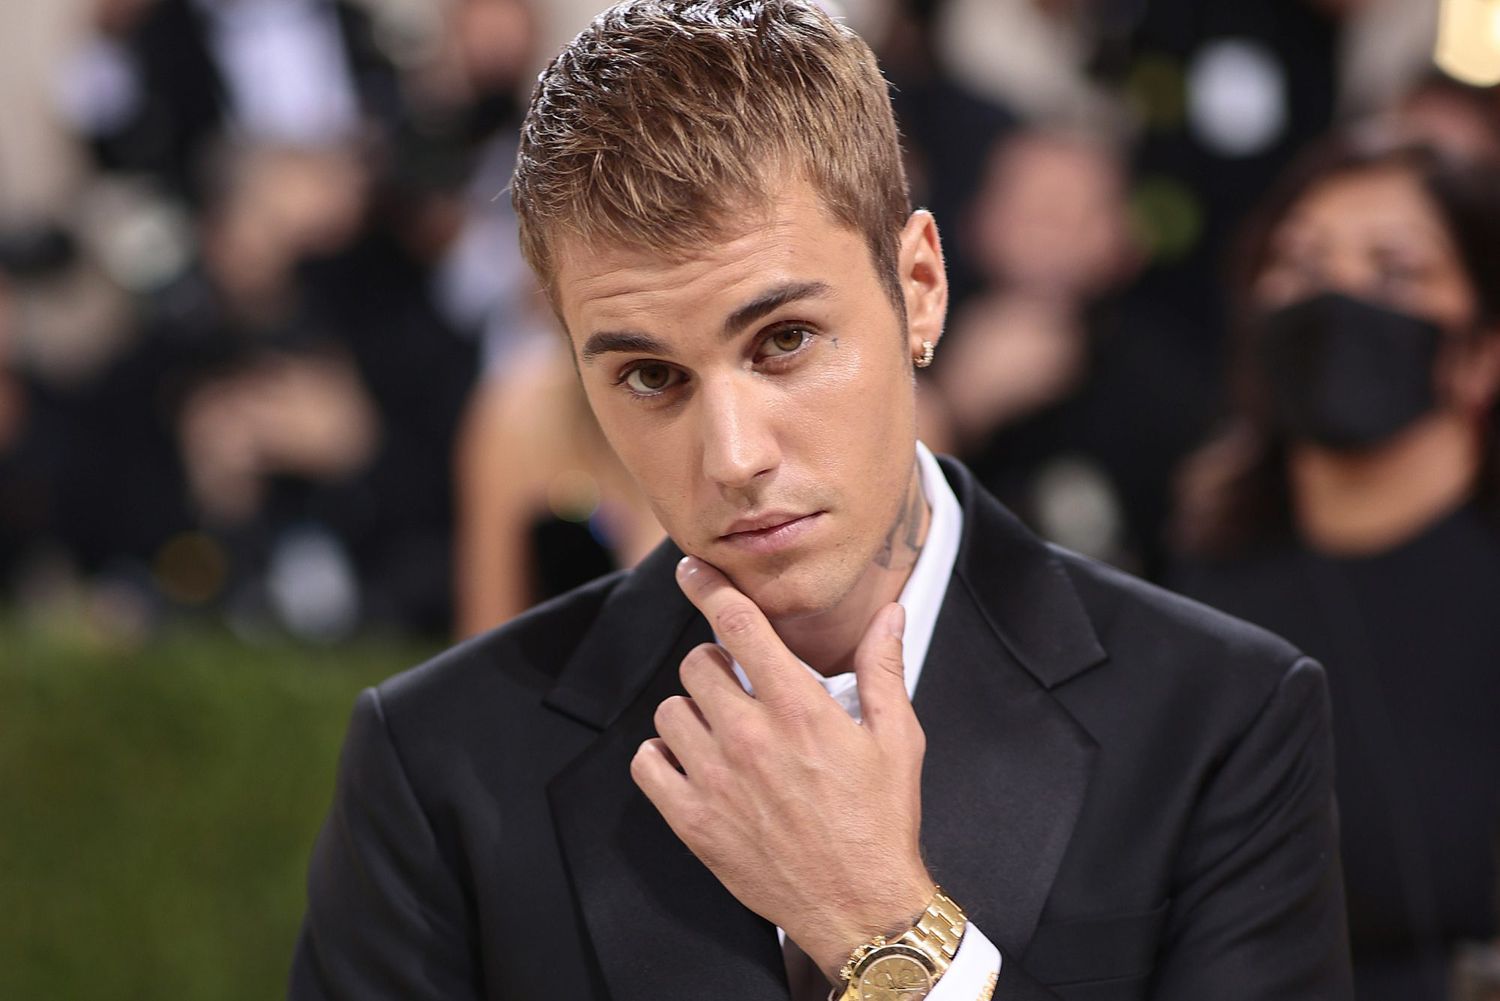 Justin Bieber’s Absence At Super Bowl Halftime Show Leaves Fans Disappointed